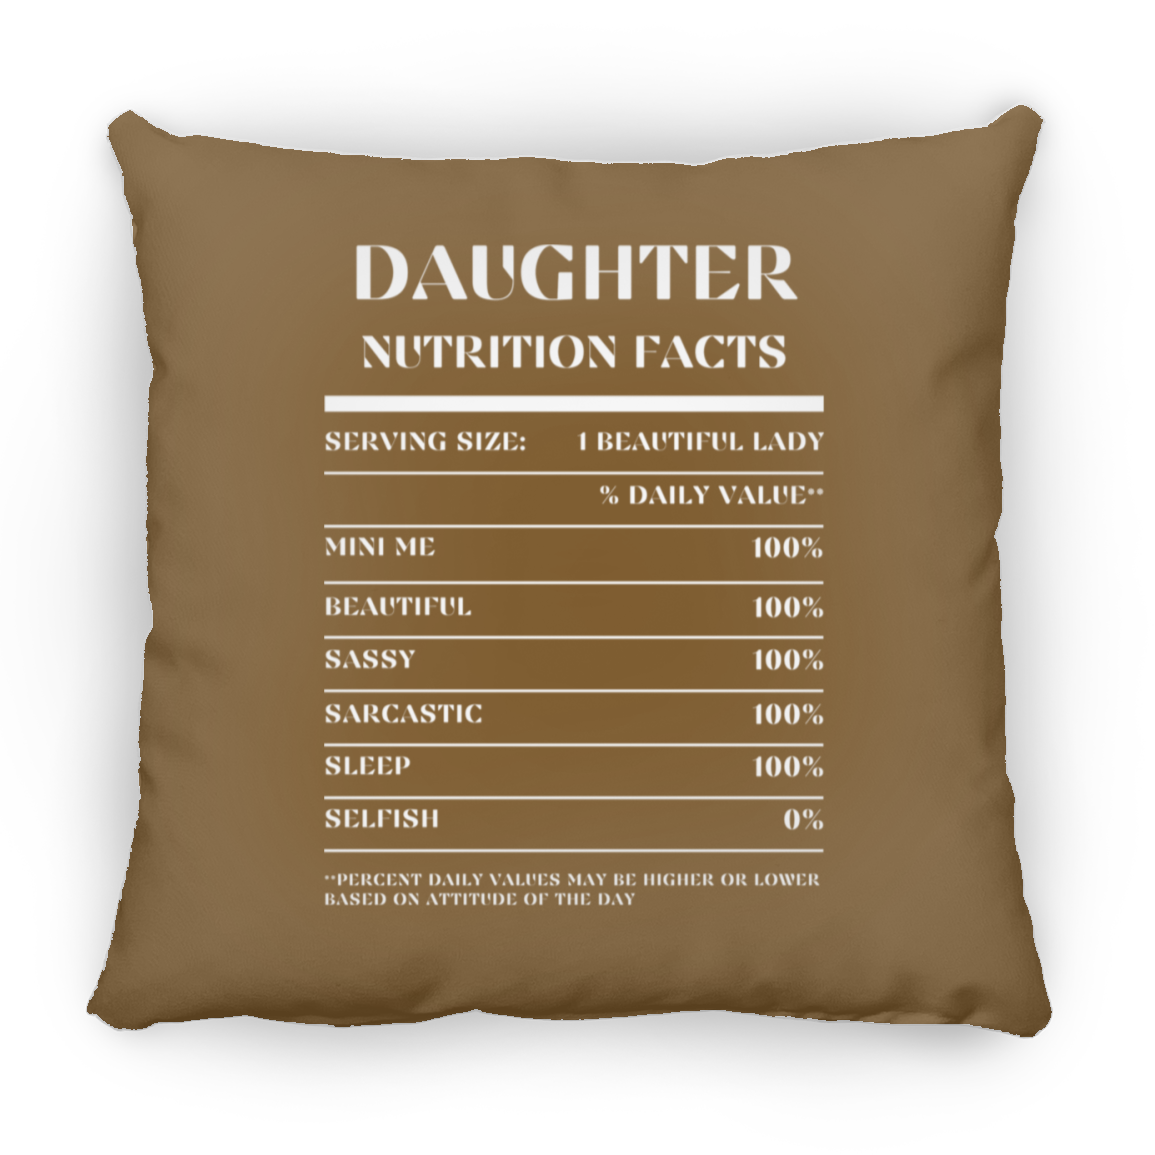 Nutrition Facts Pillow - Daughter - White